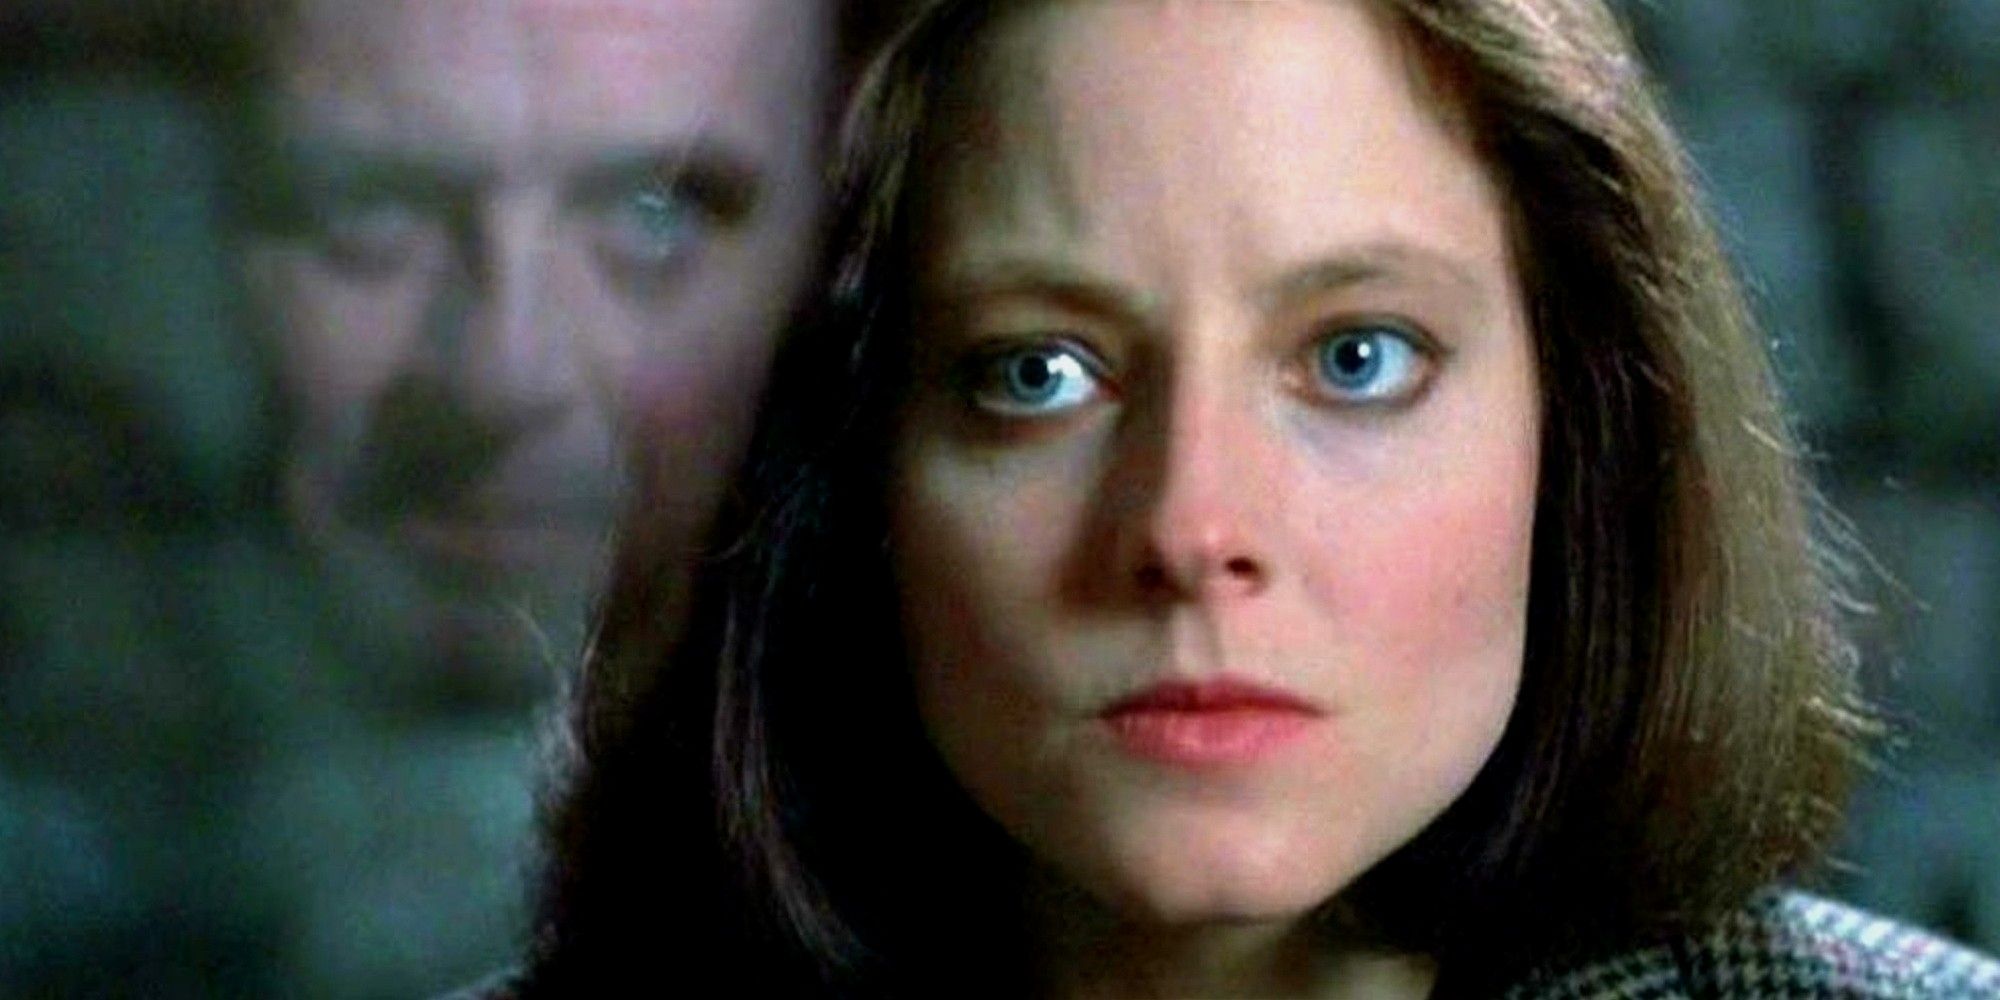 The Silence of the Lambs - Clarice looking at Hannibal through the glass